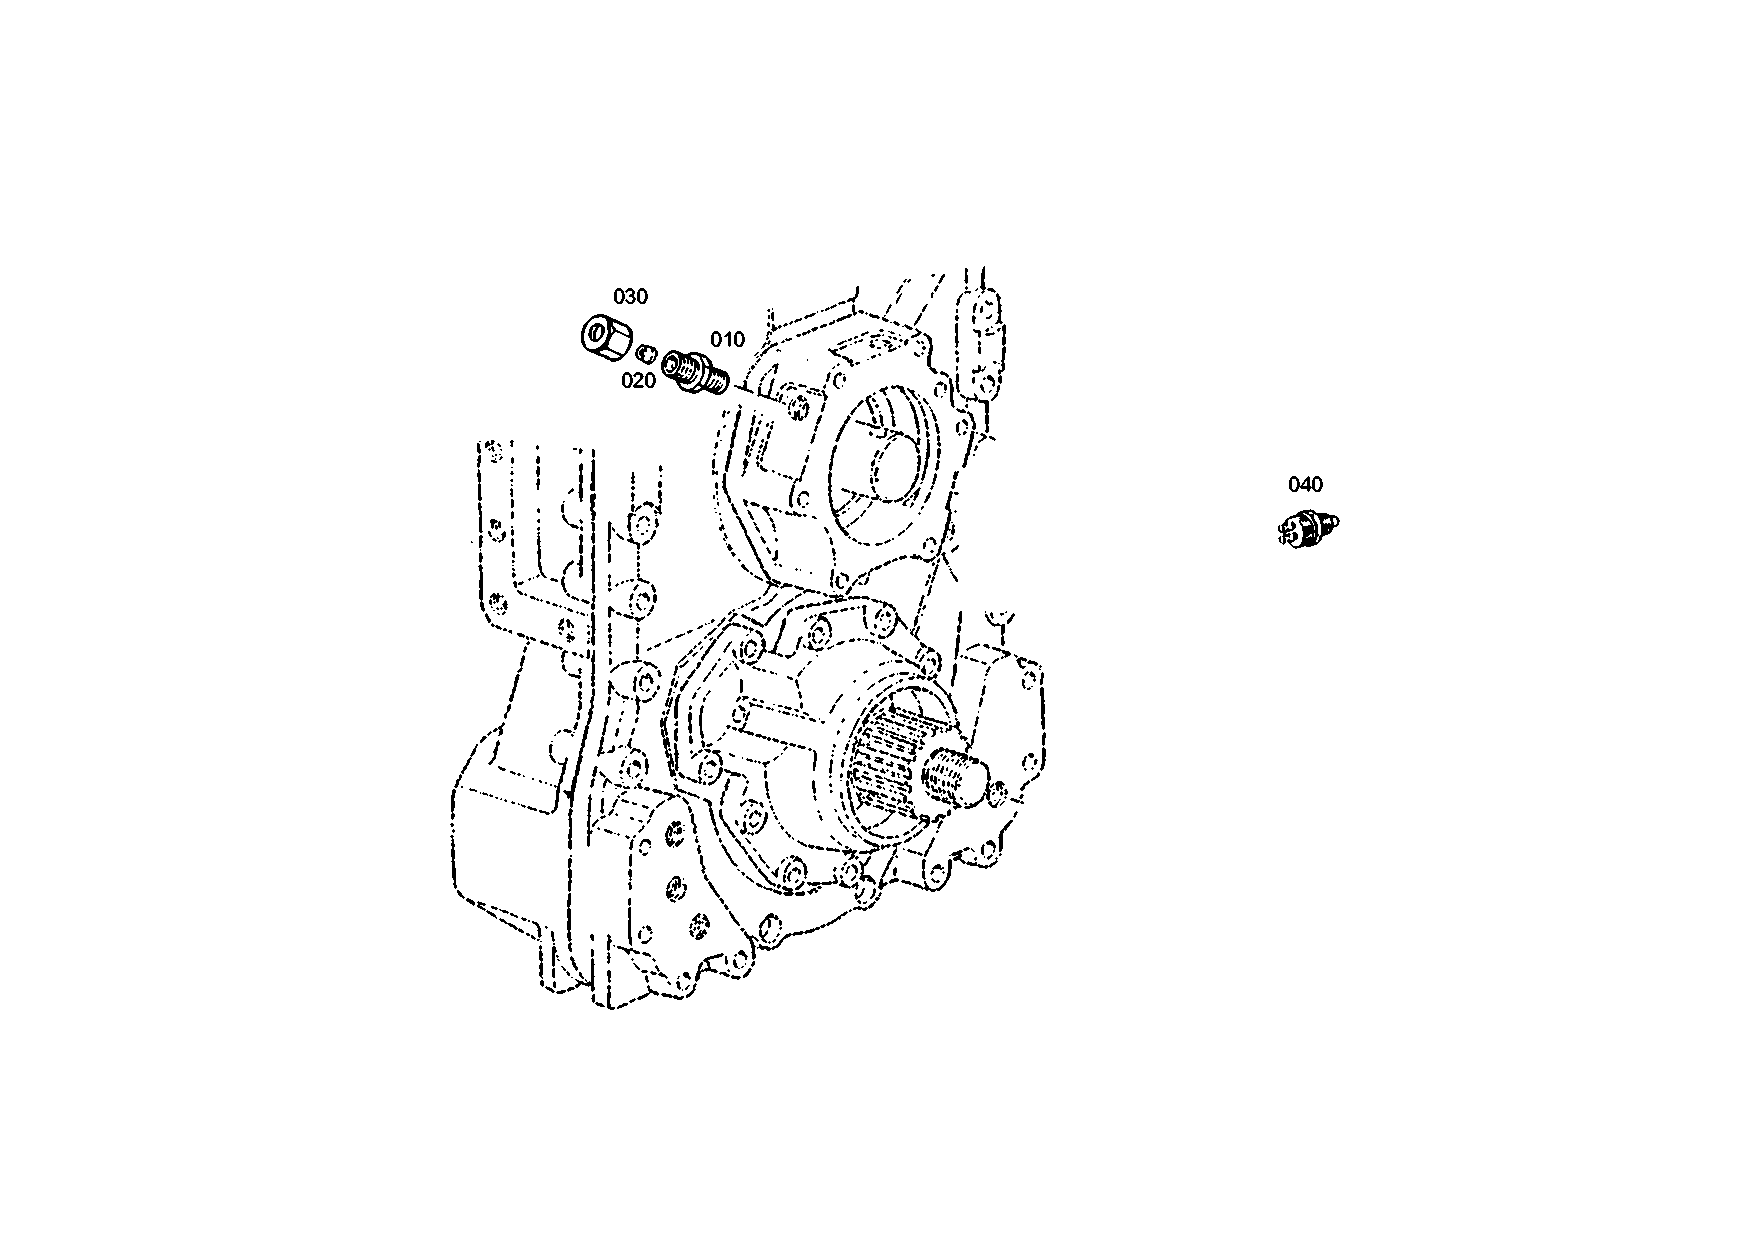 drawing for MARMON Herring MVG751127 - PRESSURE SWITCH (figure 3)